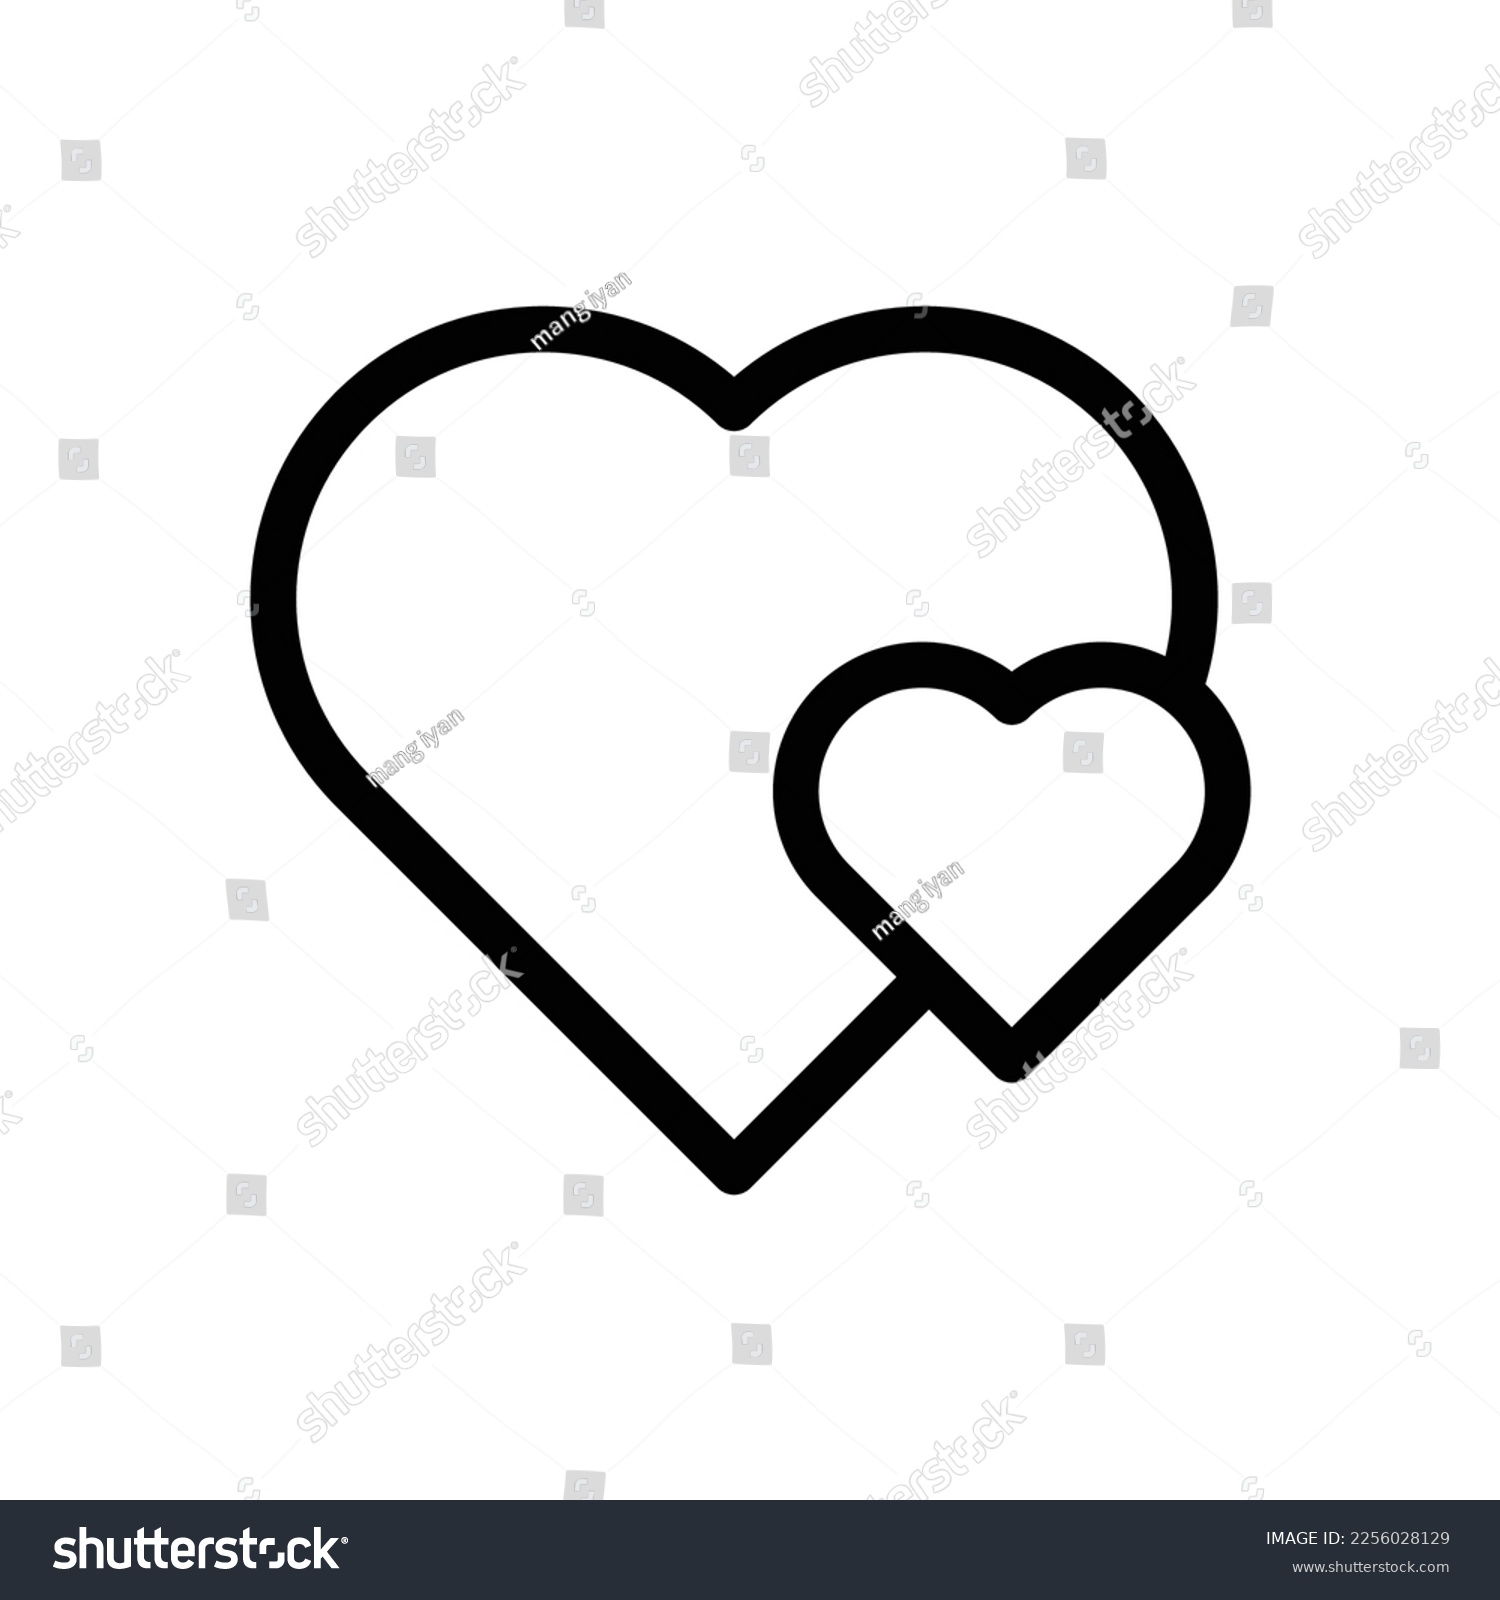 SVG of Two hearts icon, vector illustration. Flat design style. vector two hearts icon illustration isolated on white background, two hearts icon Eps10. two hearts icons graphic design vector symbols. svg